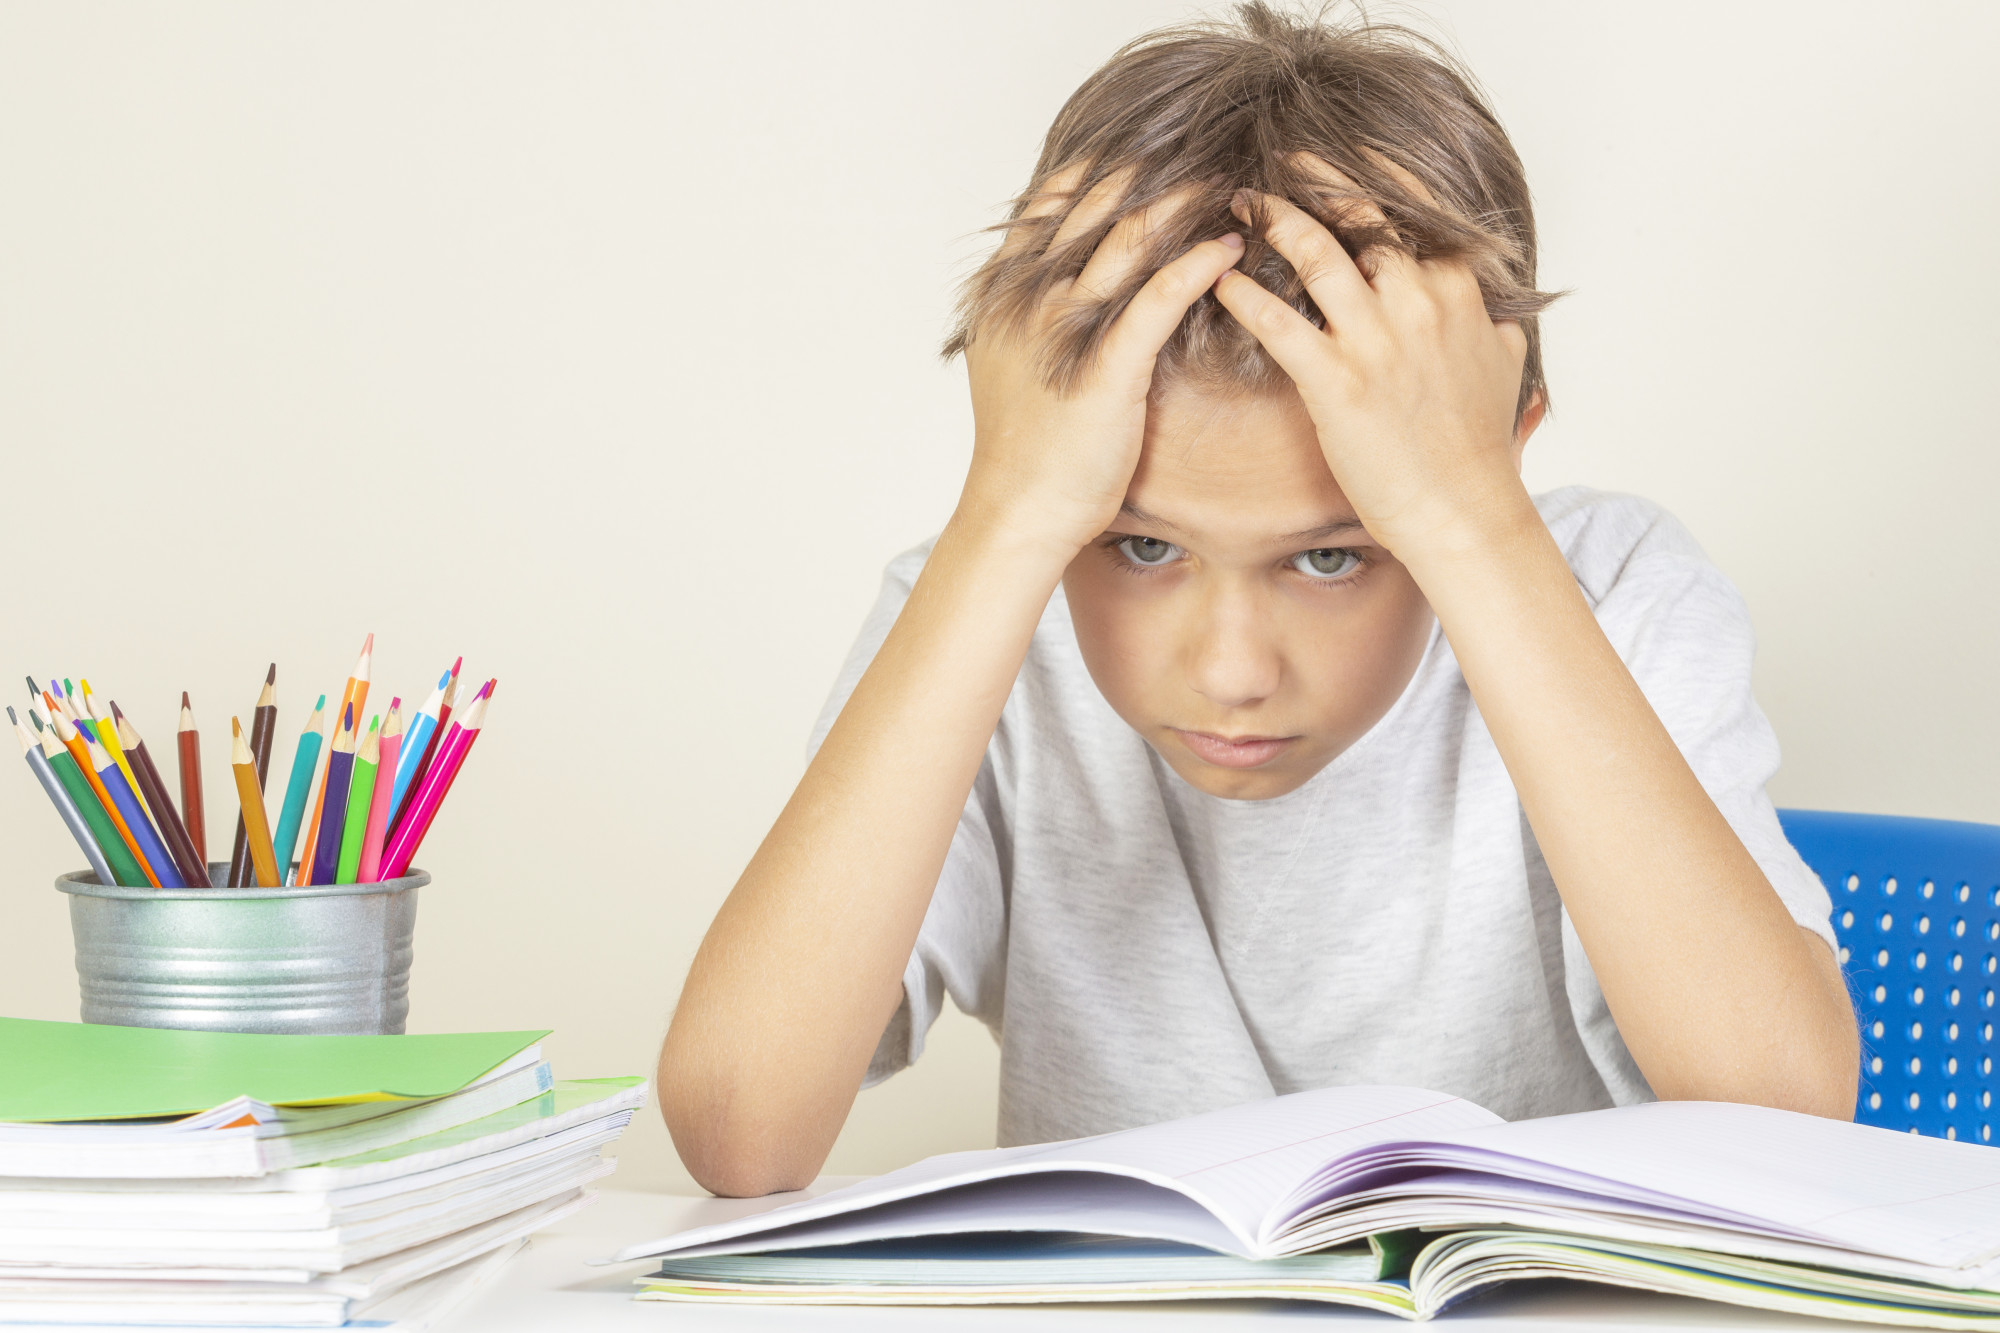 early-signs-of-dyslexia-in-children-neurohealth-arlington-heights